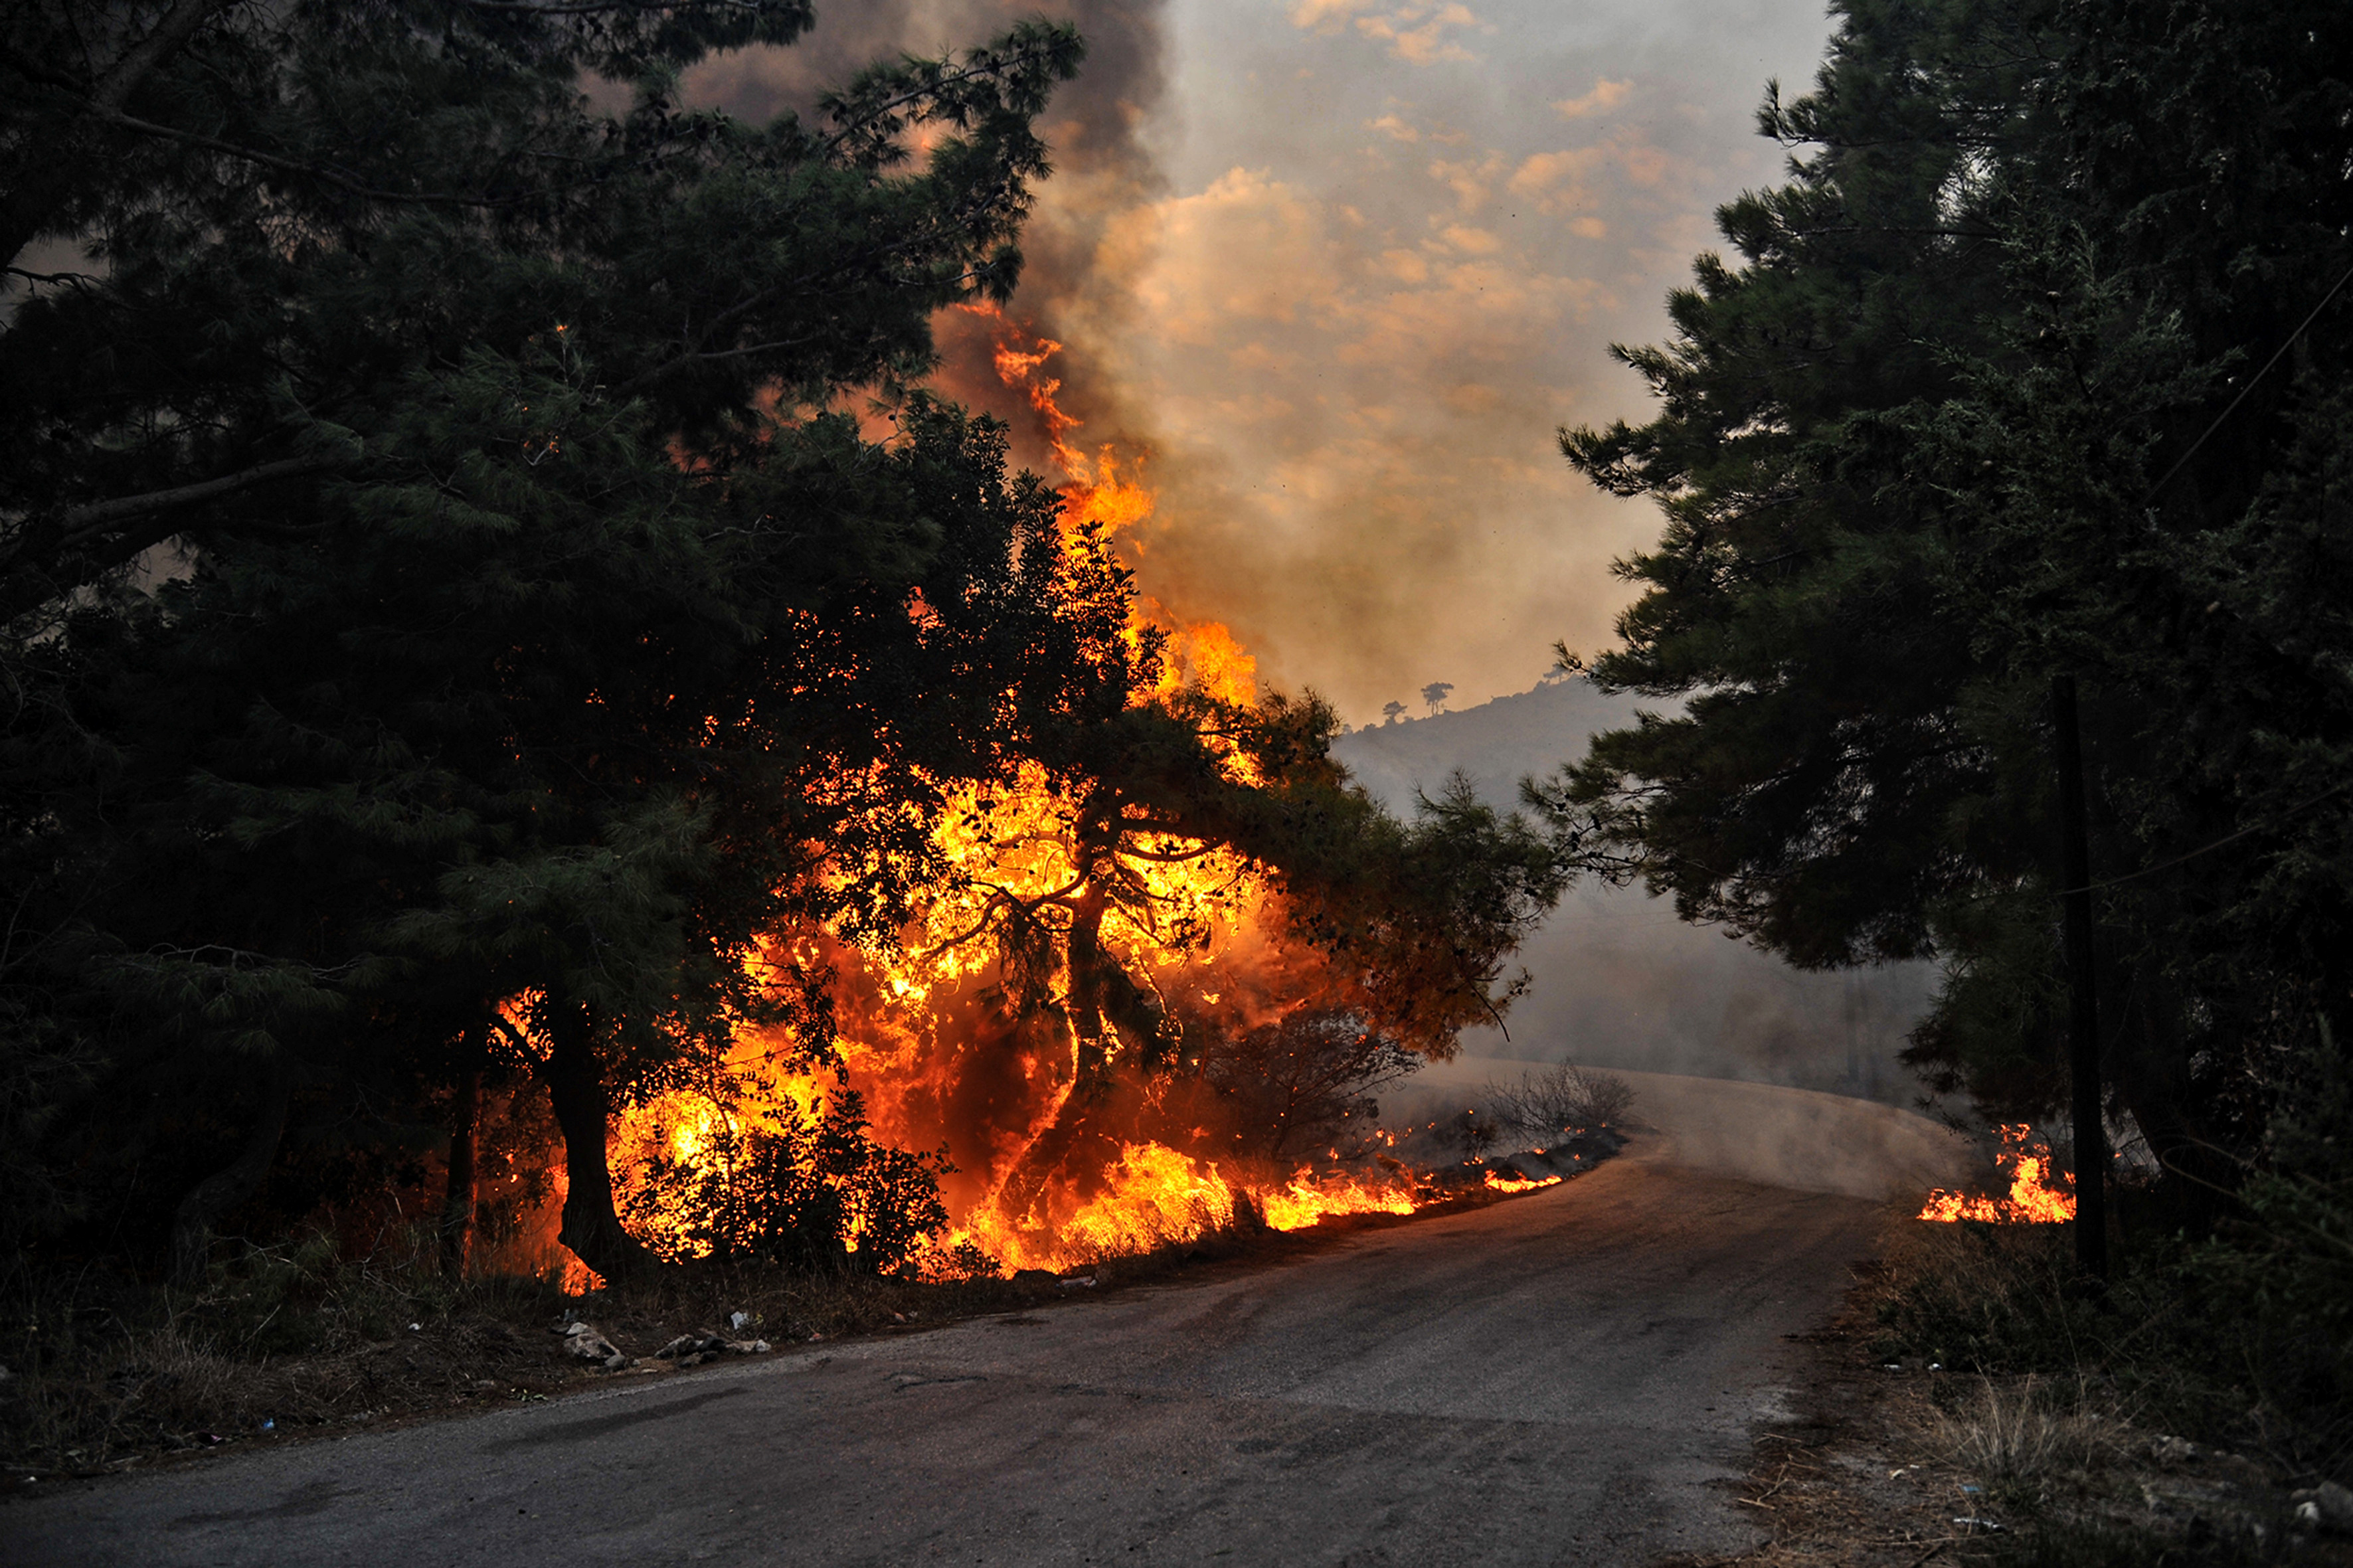 A fire burns at a forest in Latakia province, Syria in this handout released by SANA on October 9, 2020. SANA/Handout via REUTERS 